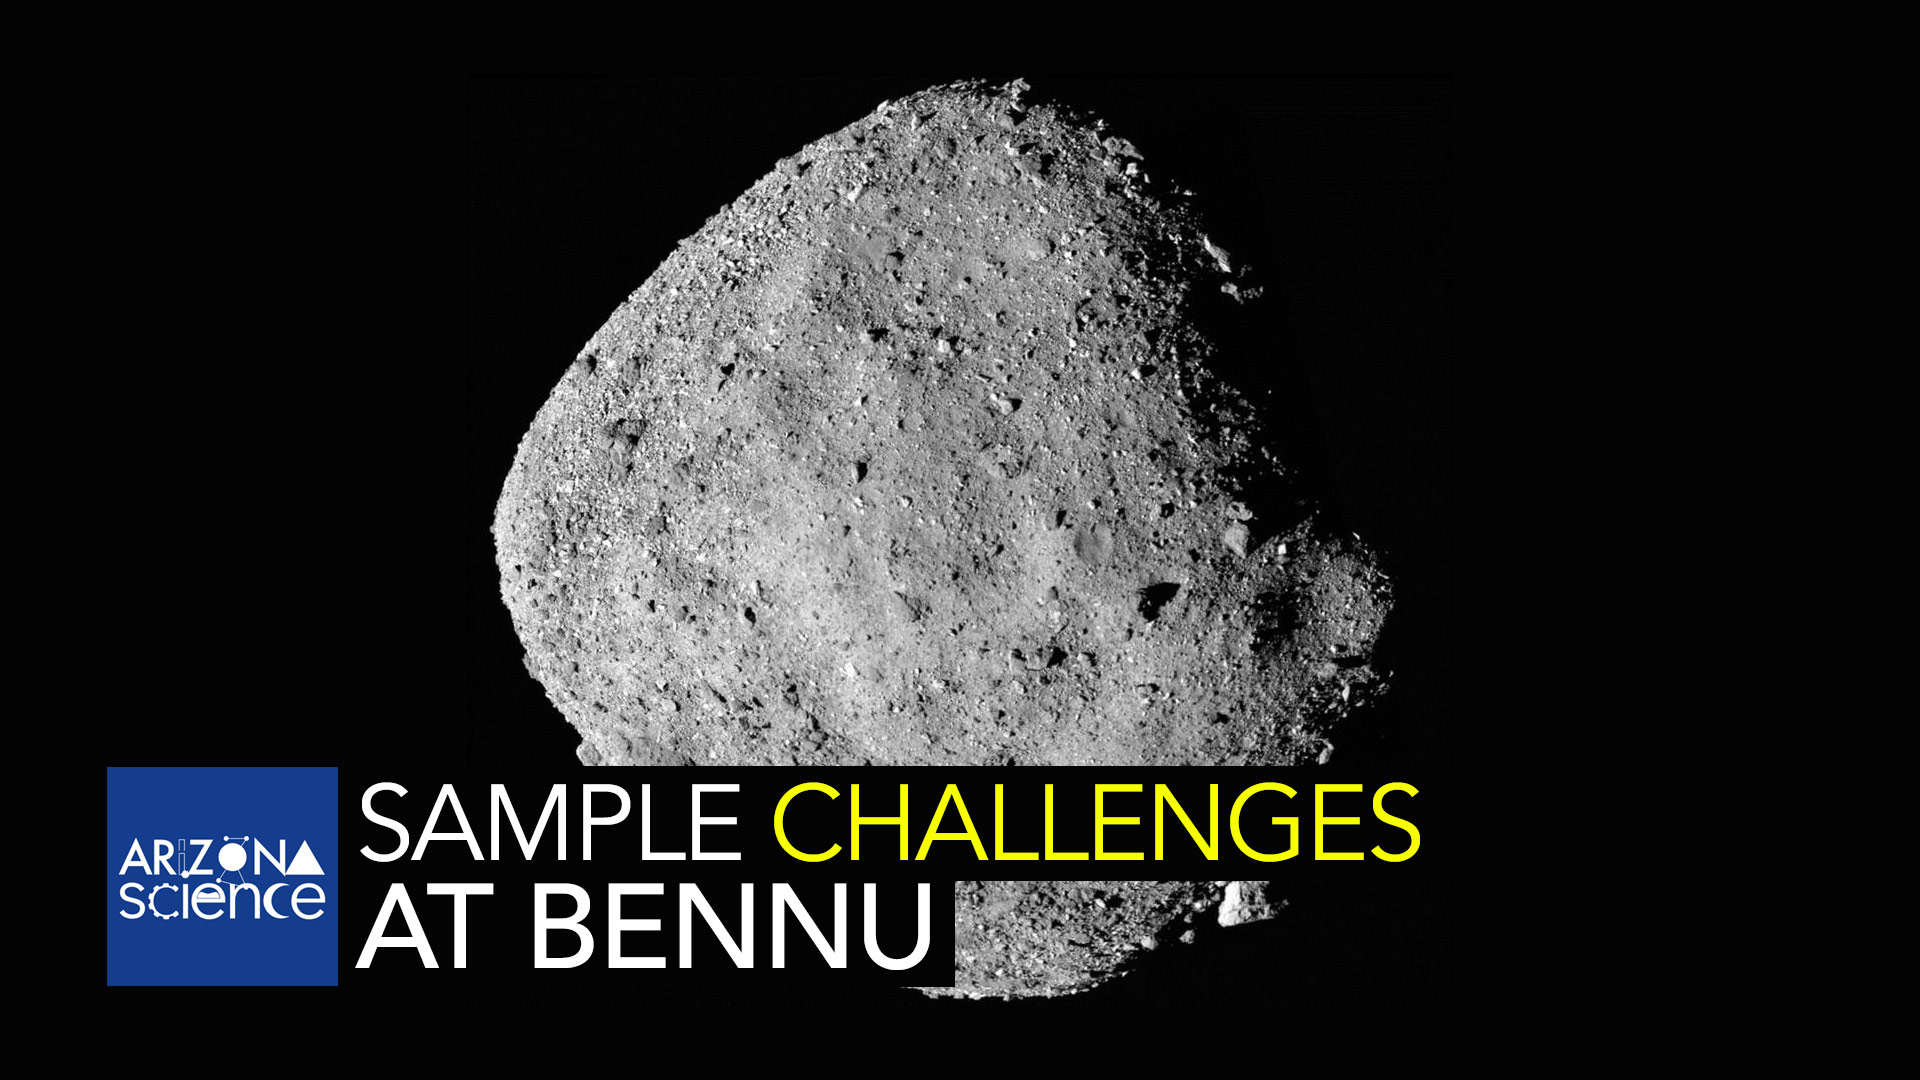 This mosaic image of asteroid Bennu is composed of 12 PolyCam images collected on Dec. 2 by the OSIRIS-REx spacecraft from a range of 15 miles (24 km).